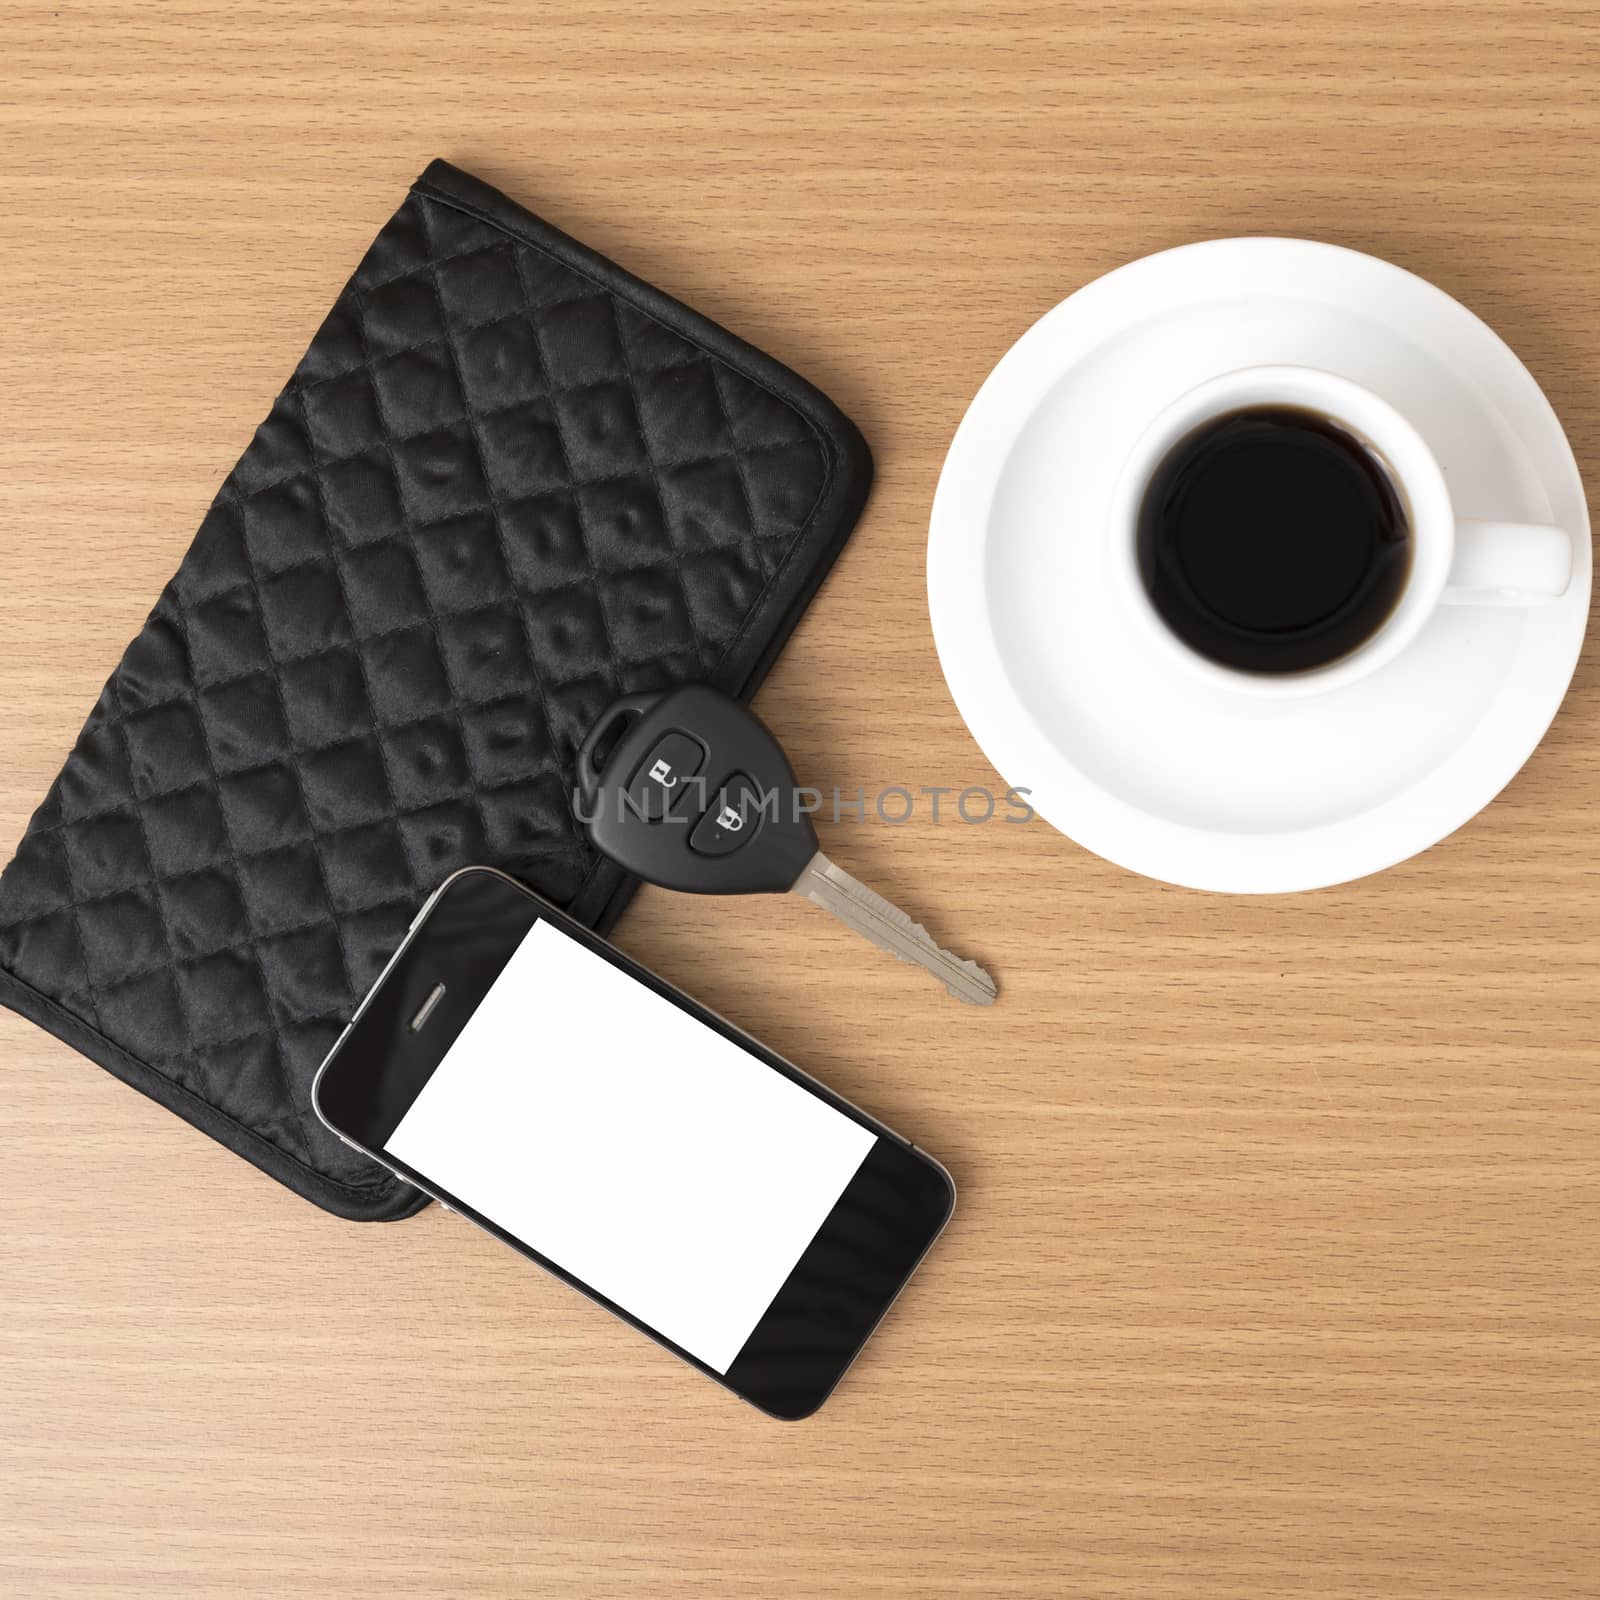 coffee cup with phone car key and wallet  by ammza12